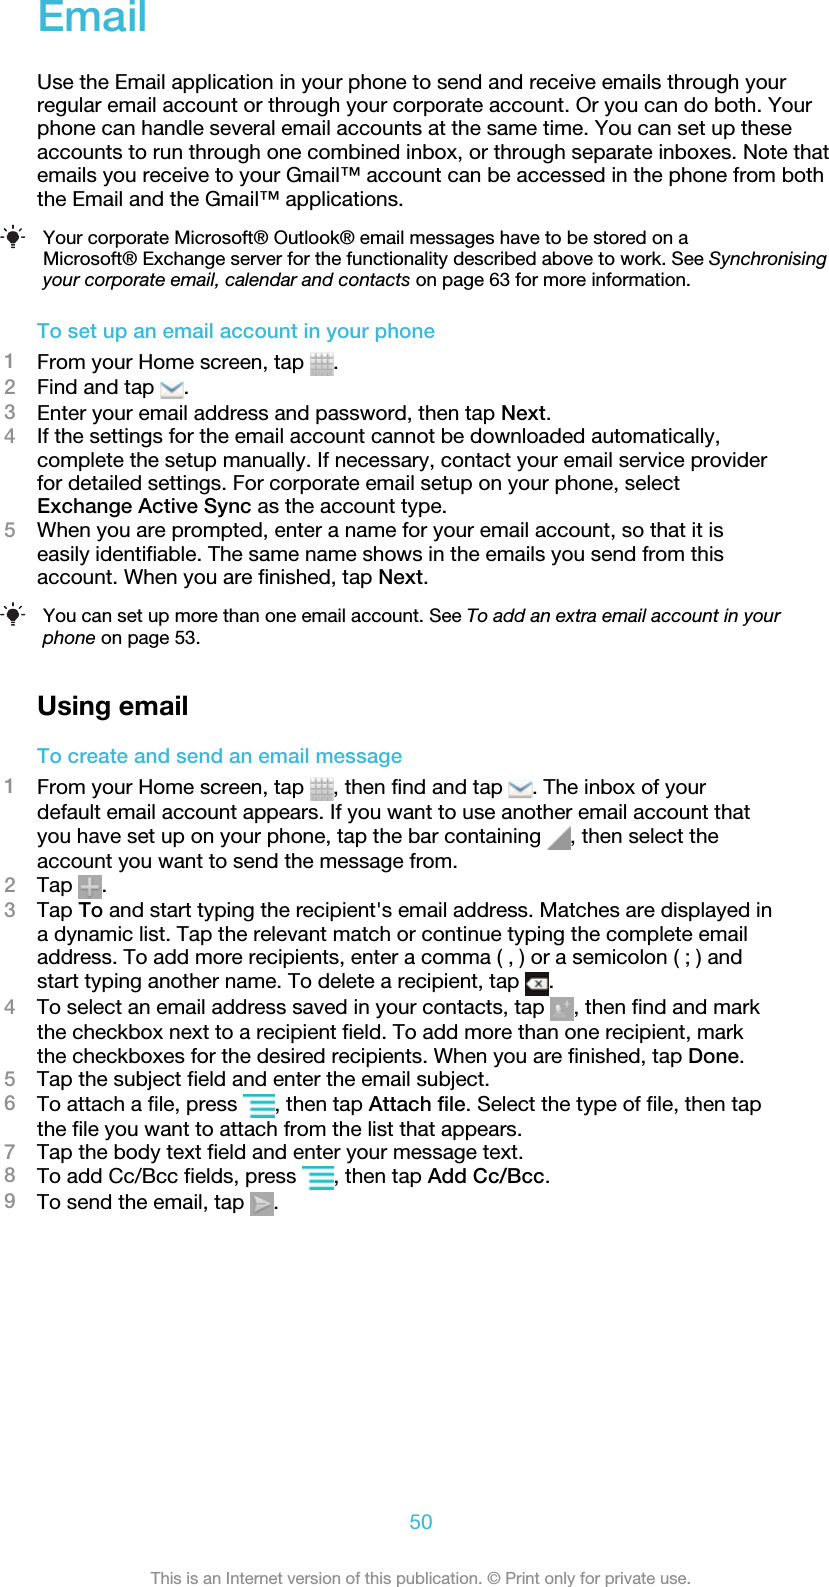 EmailUse the Email application in your phone to send and receive emails through yourregular email account or through your corporate account. Or you can do both. Yourphone can handle several email accounts at the same time. You can set up theseaccounts to run through one combined inbox, or through separate inboxes. Note thatemails you receive to your Gmail™ account can be accessed in the phone from boththe Email and the Gmail™ applications.Your corporate Microsoft® Outlook® email messages have to be stored on aMicrosoft® Exchange server for the functionality described above to work. See Synchronisingyour corporate email, calendar and contacts on page 63 for more information.To set up an email account in your phone1From your Home screen, tap  .2Find and tap  .3Enter your email address and password, then tap Next.4If the settings for the email account cannot be downloaded automatically,complete the setup manually. If necessary, contact your email service providerfor detailed settings. For corporate email setup on your phone, selectExchange Active Sync as the account type.5When you are prompted, enter a name for your email account, so that it iseasily identifiable. The same name shows in the emails you send from thisaccount. When you are finished, tap Next.You can set up more than one email account. See To add an extra email account in yourphone on page 53.Using emailTo create and send an email message1From your Home screen, tap  , then find and tap  . The inbox of yourdefault email account appears. If you want to use another email account thatyou have set up on your phone, tap the bar containing  , then select theaccount you want to send the message from.2Tap  .3Tap To and start typing the recipient&apos;s email address. Matches are displayed ina dynamic list. Tap the relevant match or continue typing the complete emailaddress. To add more recipients, enter a comma ( , ) or a semicolon ( ; ) andstart typing another name. To delete a recipient, tap  .4To select an email address saved in your contacts, tap  , then find and markthe checkbox next to a recipient field. To add more than one recipient, markthe checkboxes for the desired recipients. When you are finished, tap Done.5Tap the subject field and enter the email subject.6To attach a file, press  , then tap Attach file. Select the type of file, then tapthe file you want to attach from the list that appears.7Tap the body text field and enter your message text.8To add Cc/Bcc fields, press  , then tap Add Cc/Bcc.9To send the email, tap  .50This is an Internet version of this publication. © Print only for private use.